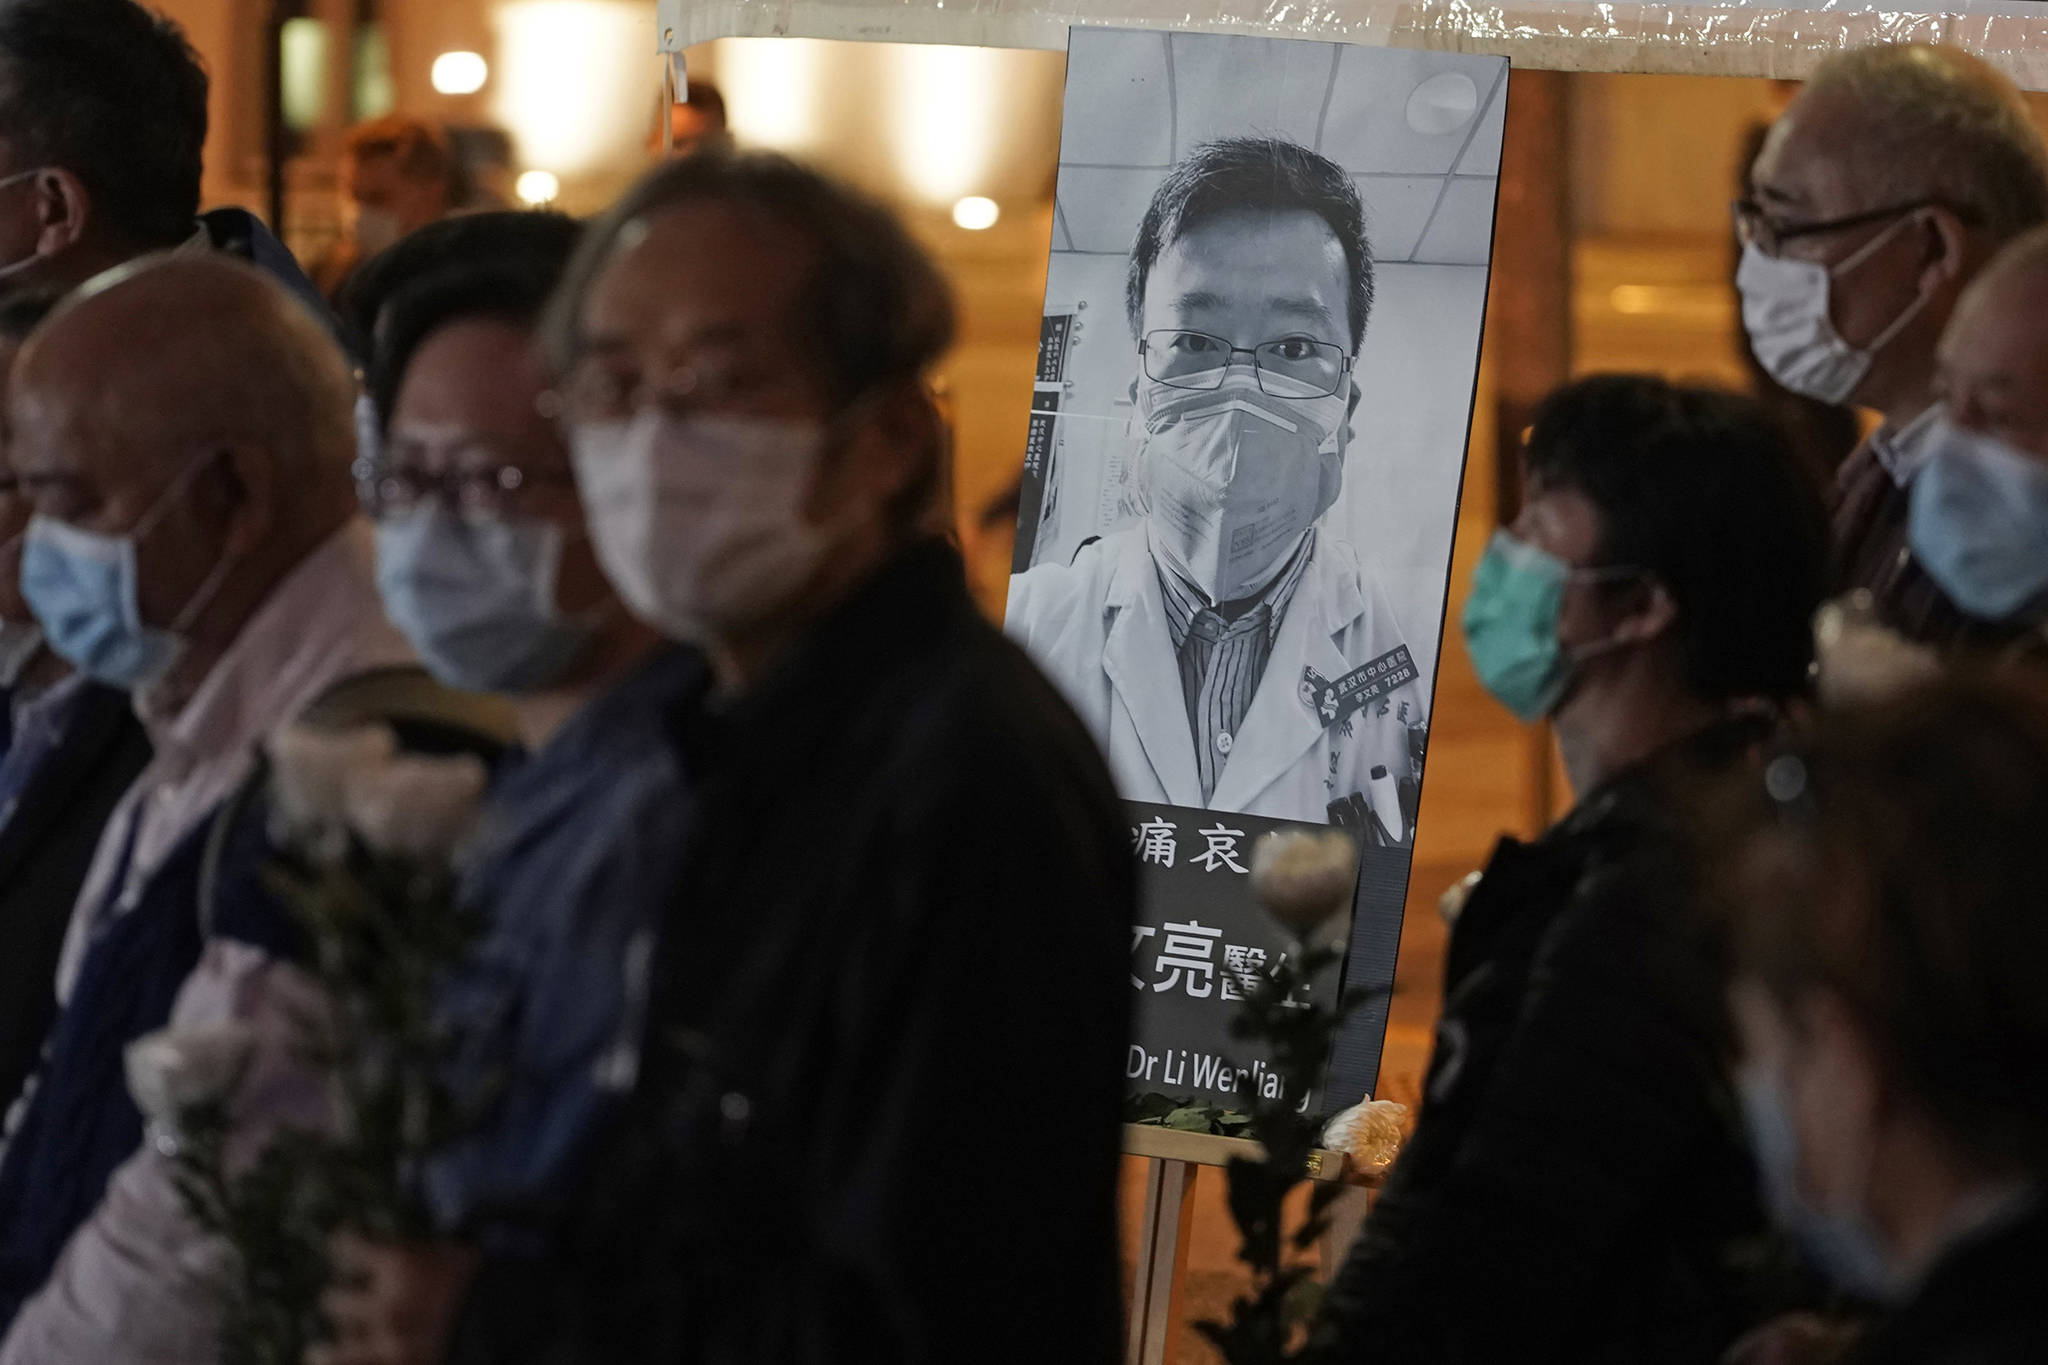 People wearing masks, attend a vigil for Chinese doctor Li Wenliang, in Hong Kong, Friday, Feb. 7. The death of a young doctor who was reprimanded for warning about China’s new virus triggered an outpouring Friday of praise for him and fury that communist authorities put politics above public safety. (AP Photo | Kin Cheung)